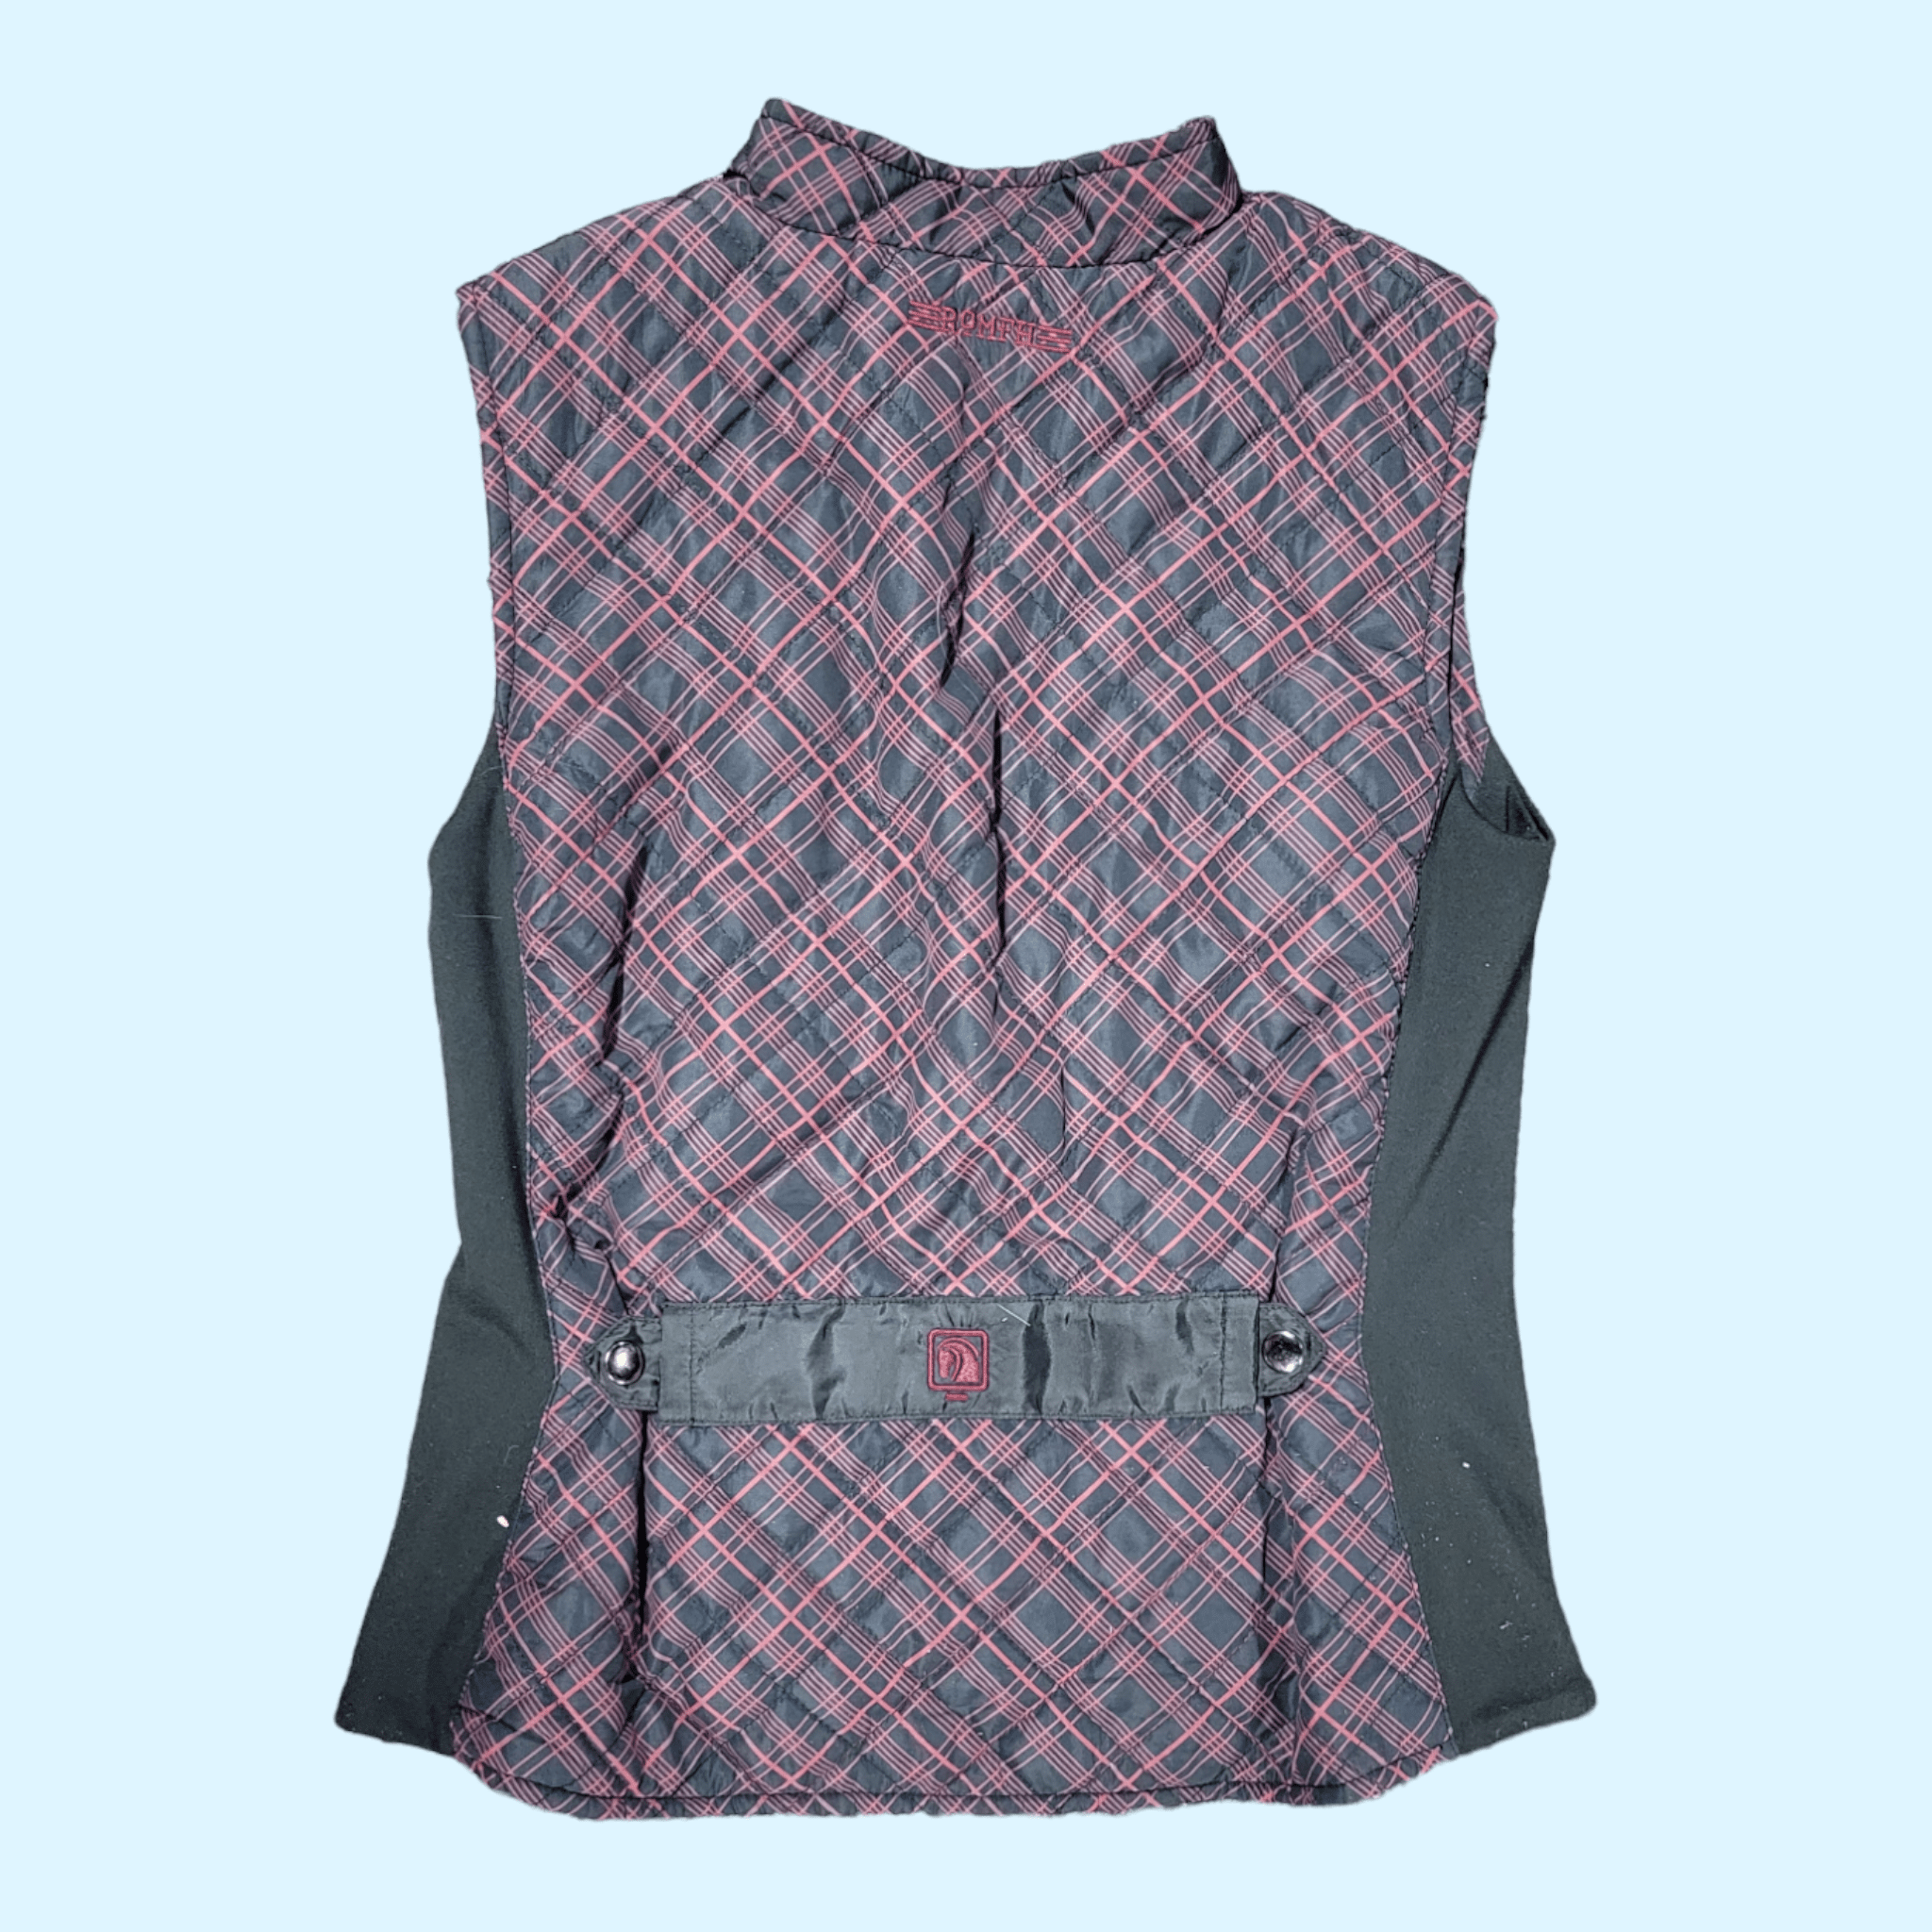 Romfh Hampton Quilted Vest in Burgundy - Small - Equine Exchange Tack Shop